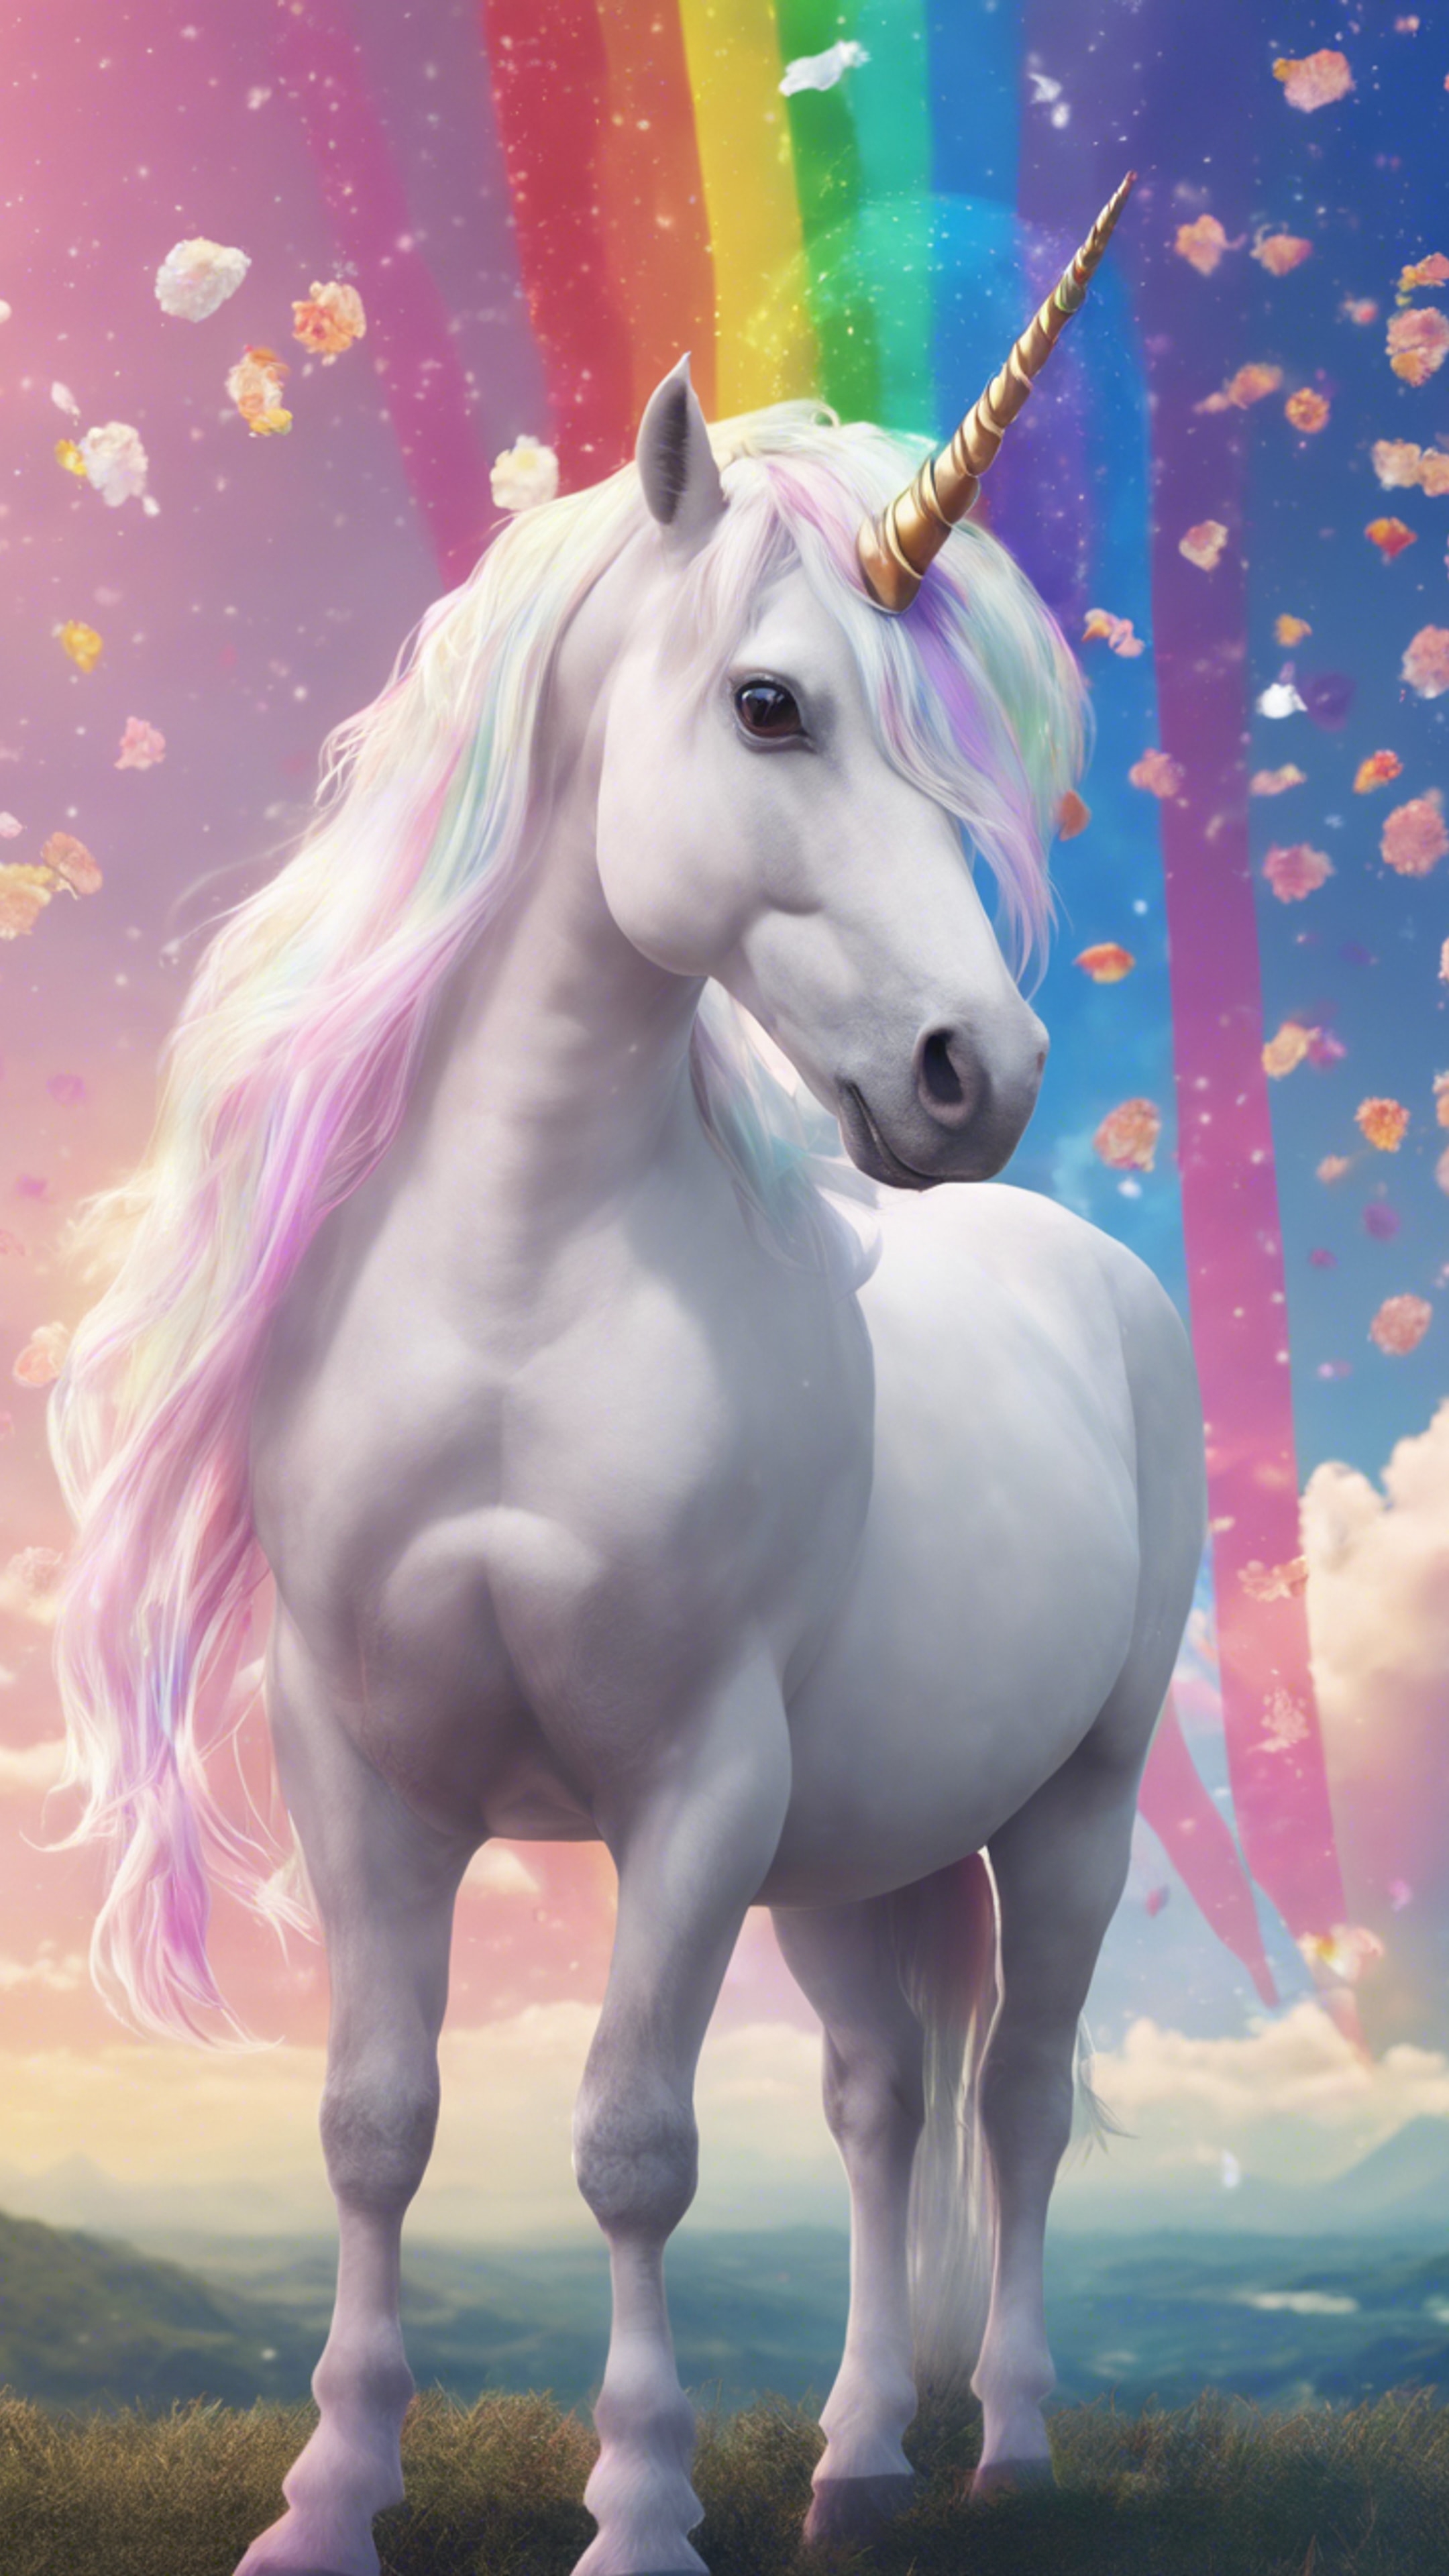 A white unicorn with rainbow-colored mane in a kawaii styled anime background.壁紙[3fcd035c52a54abd9a77]